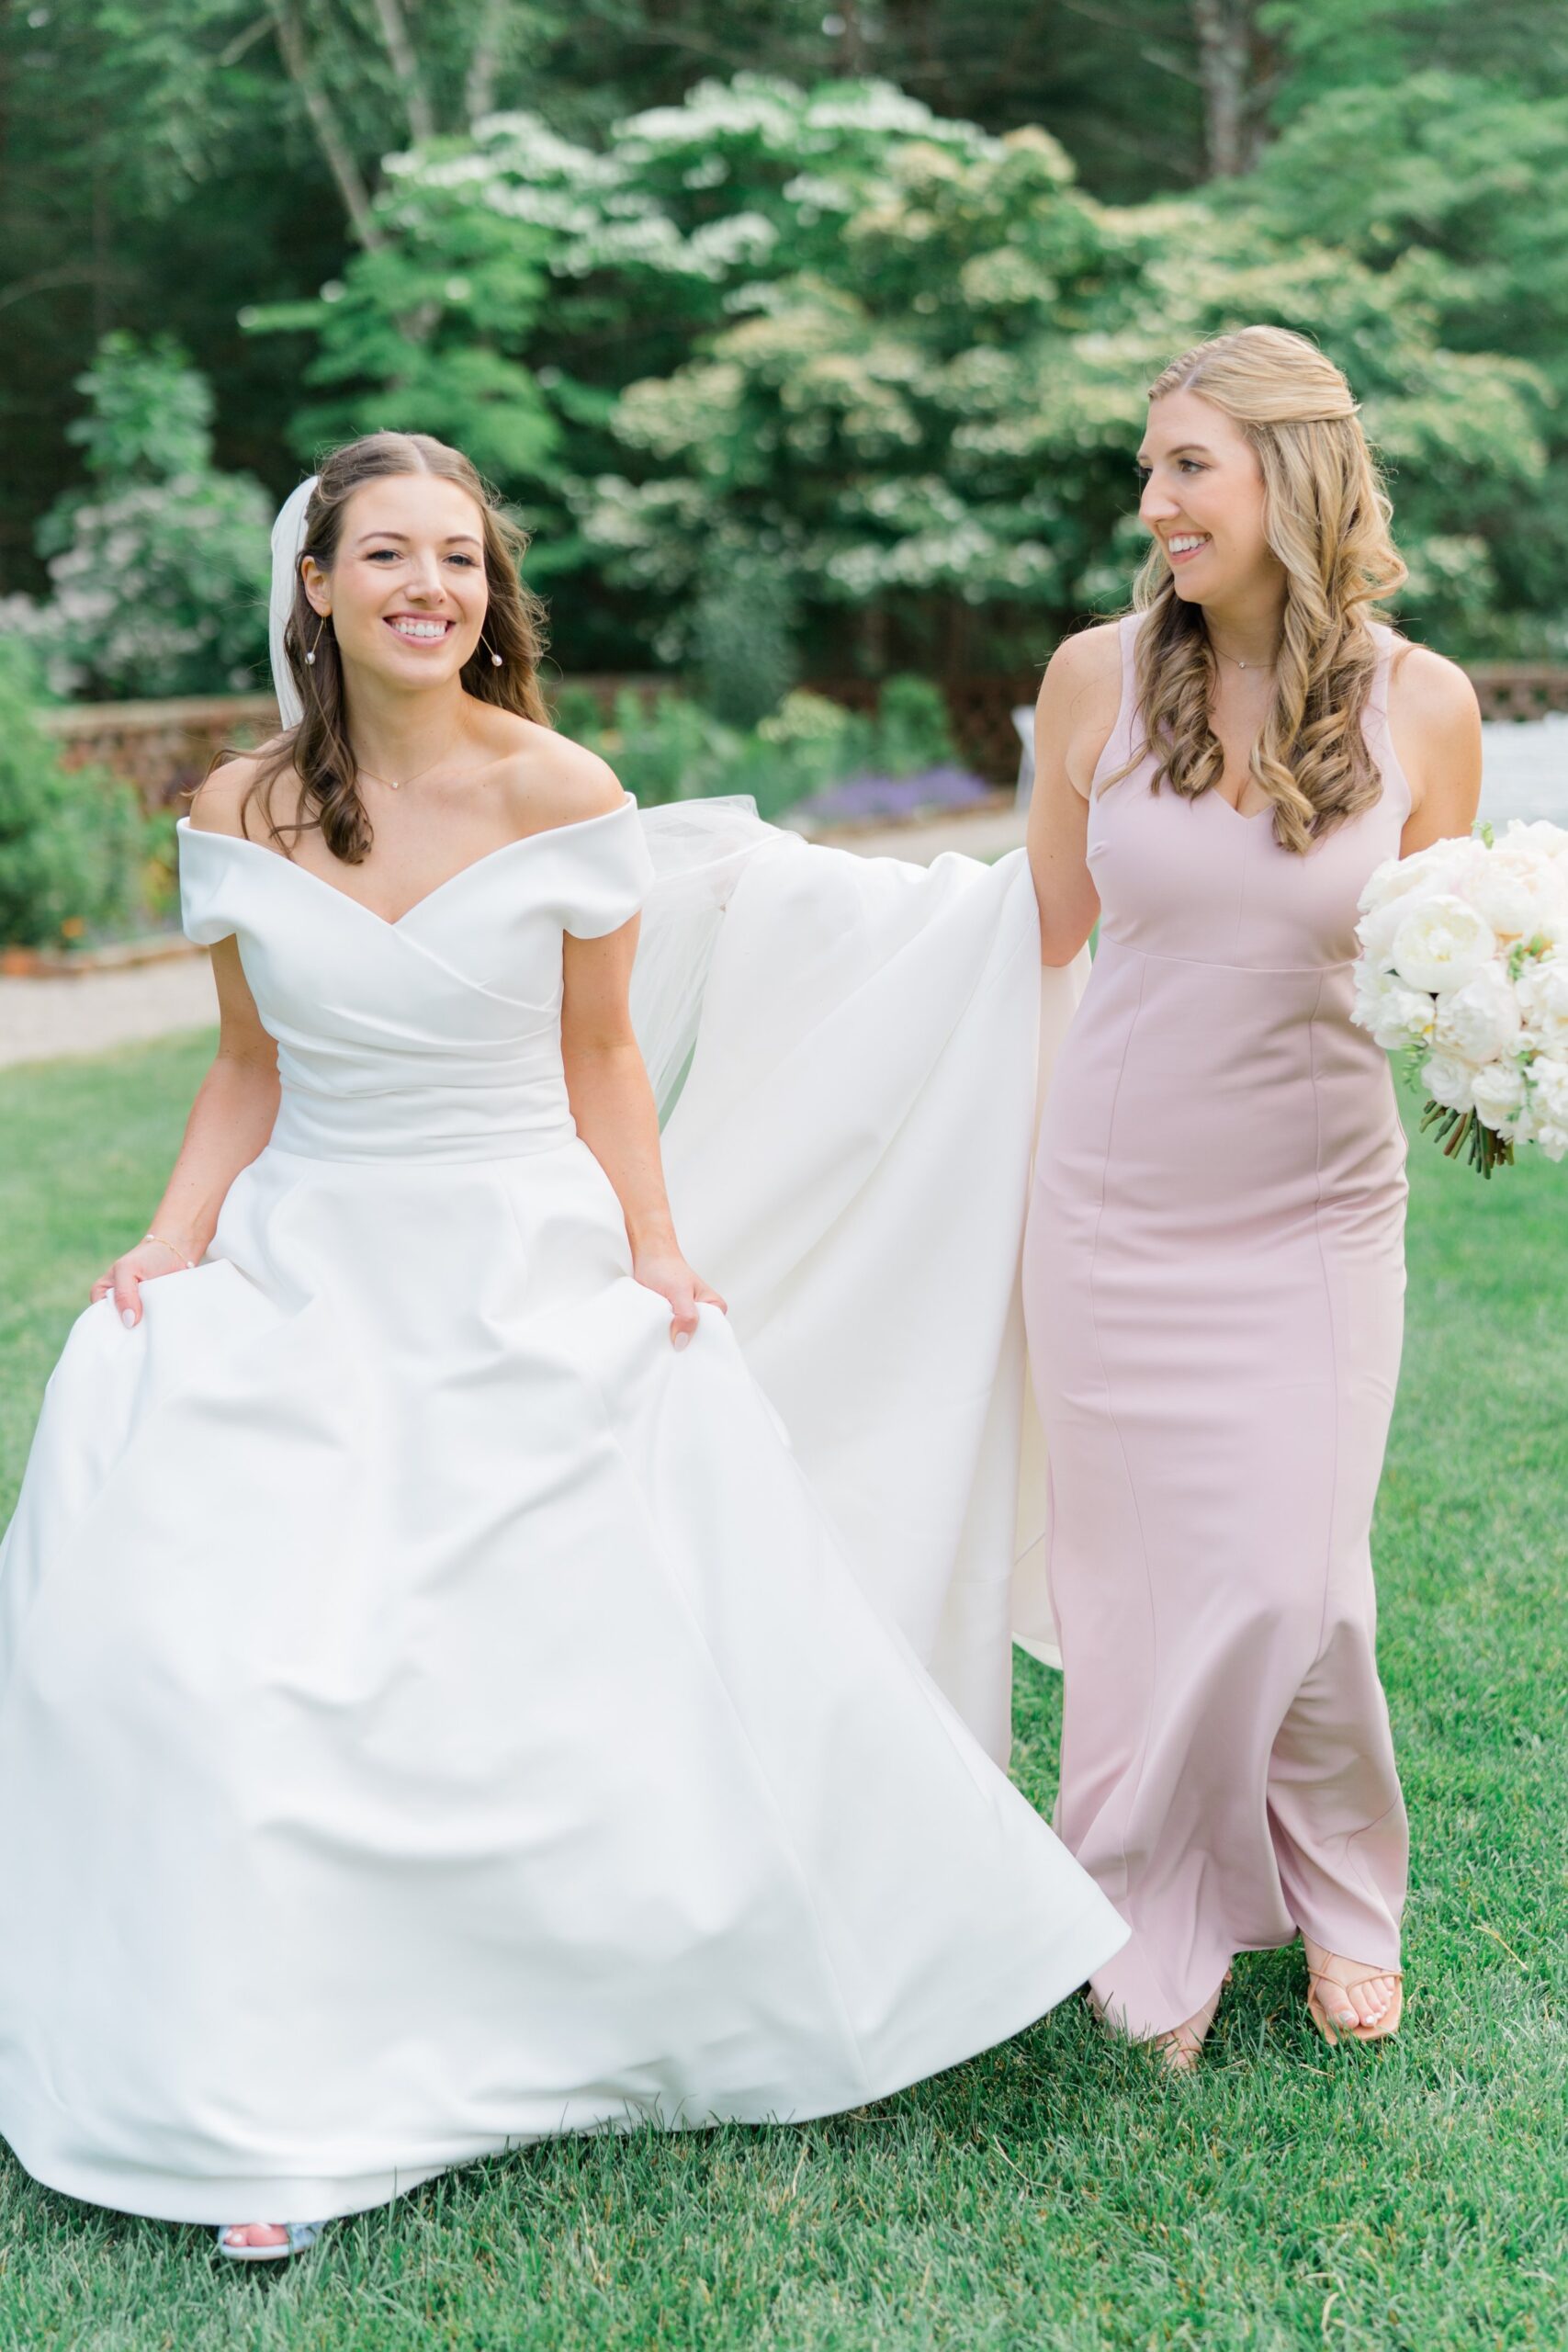 Maid of honor in dusty pink dress helping sister walk with large wedding dress.